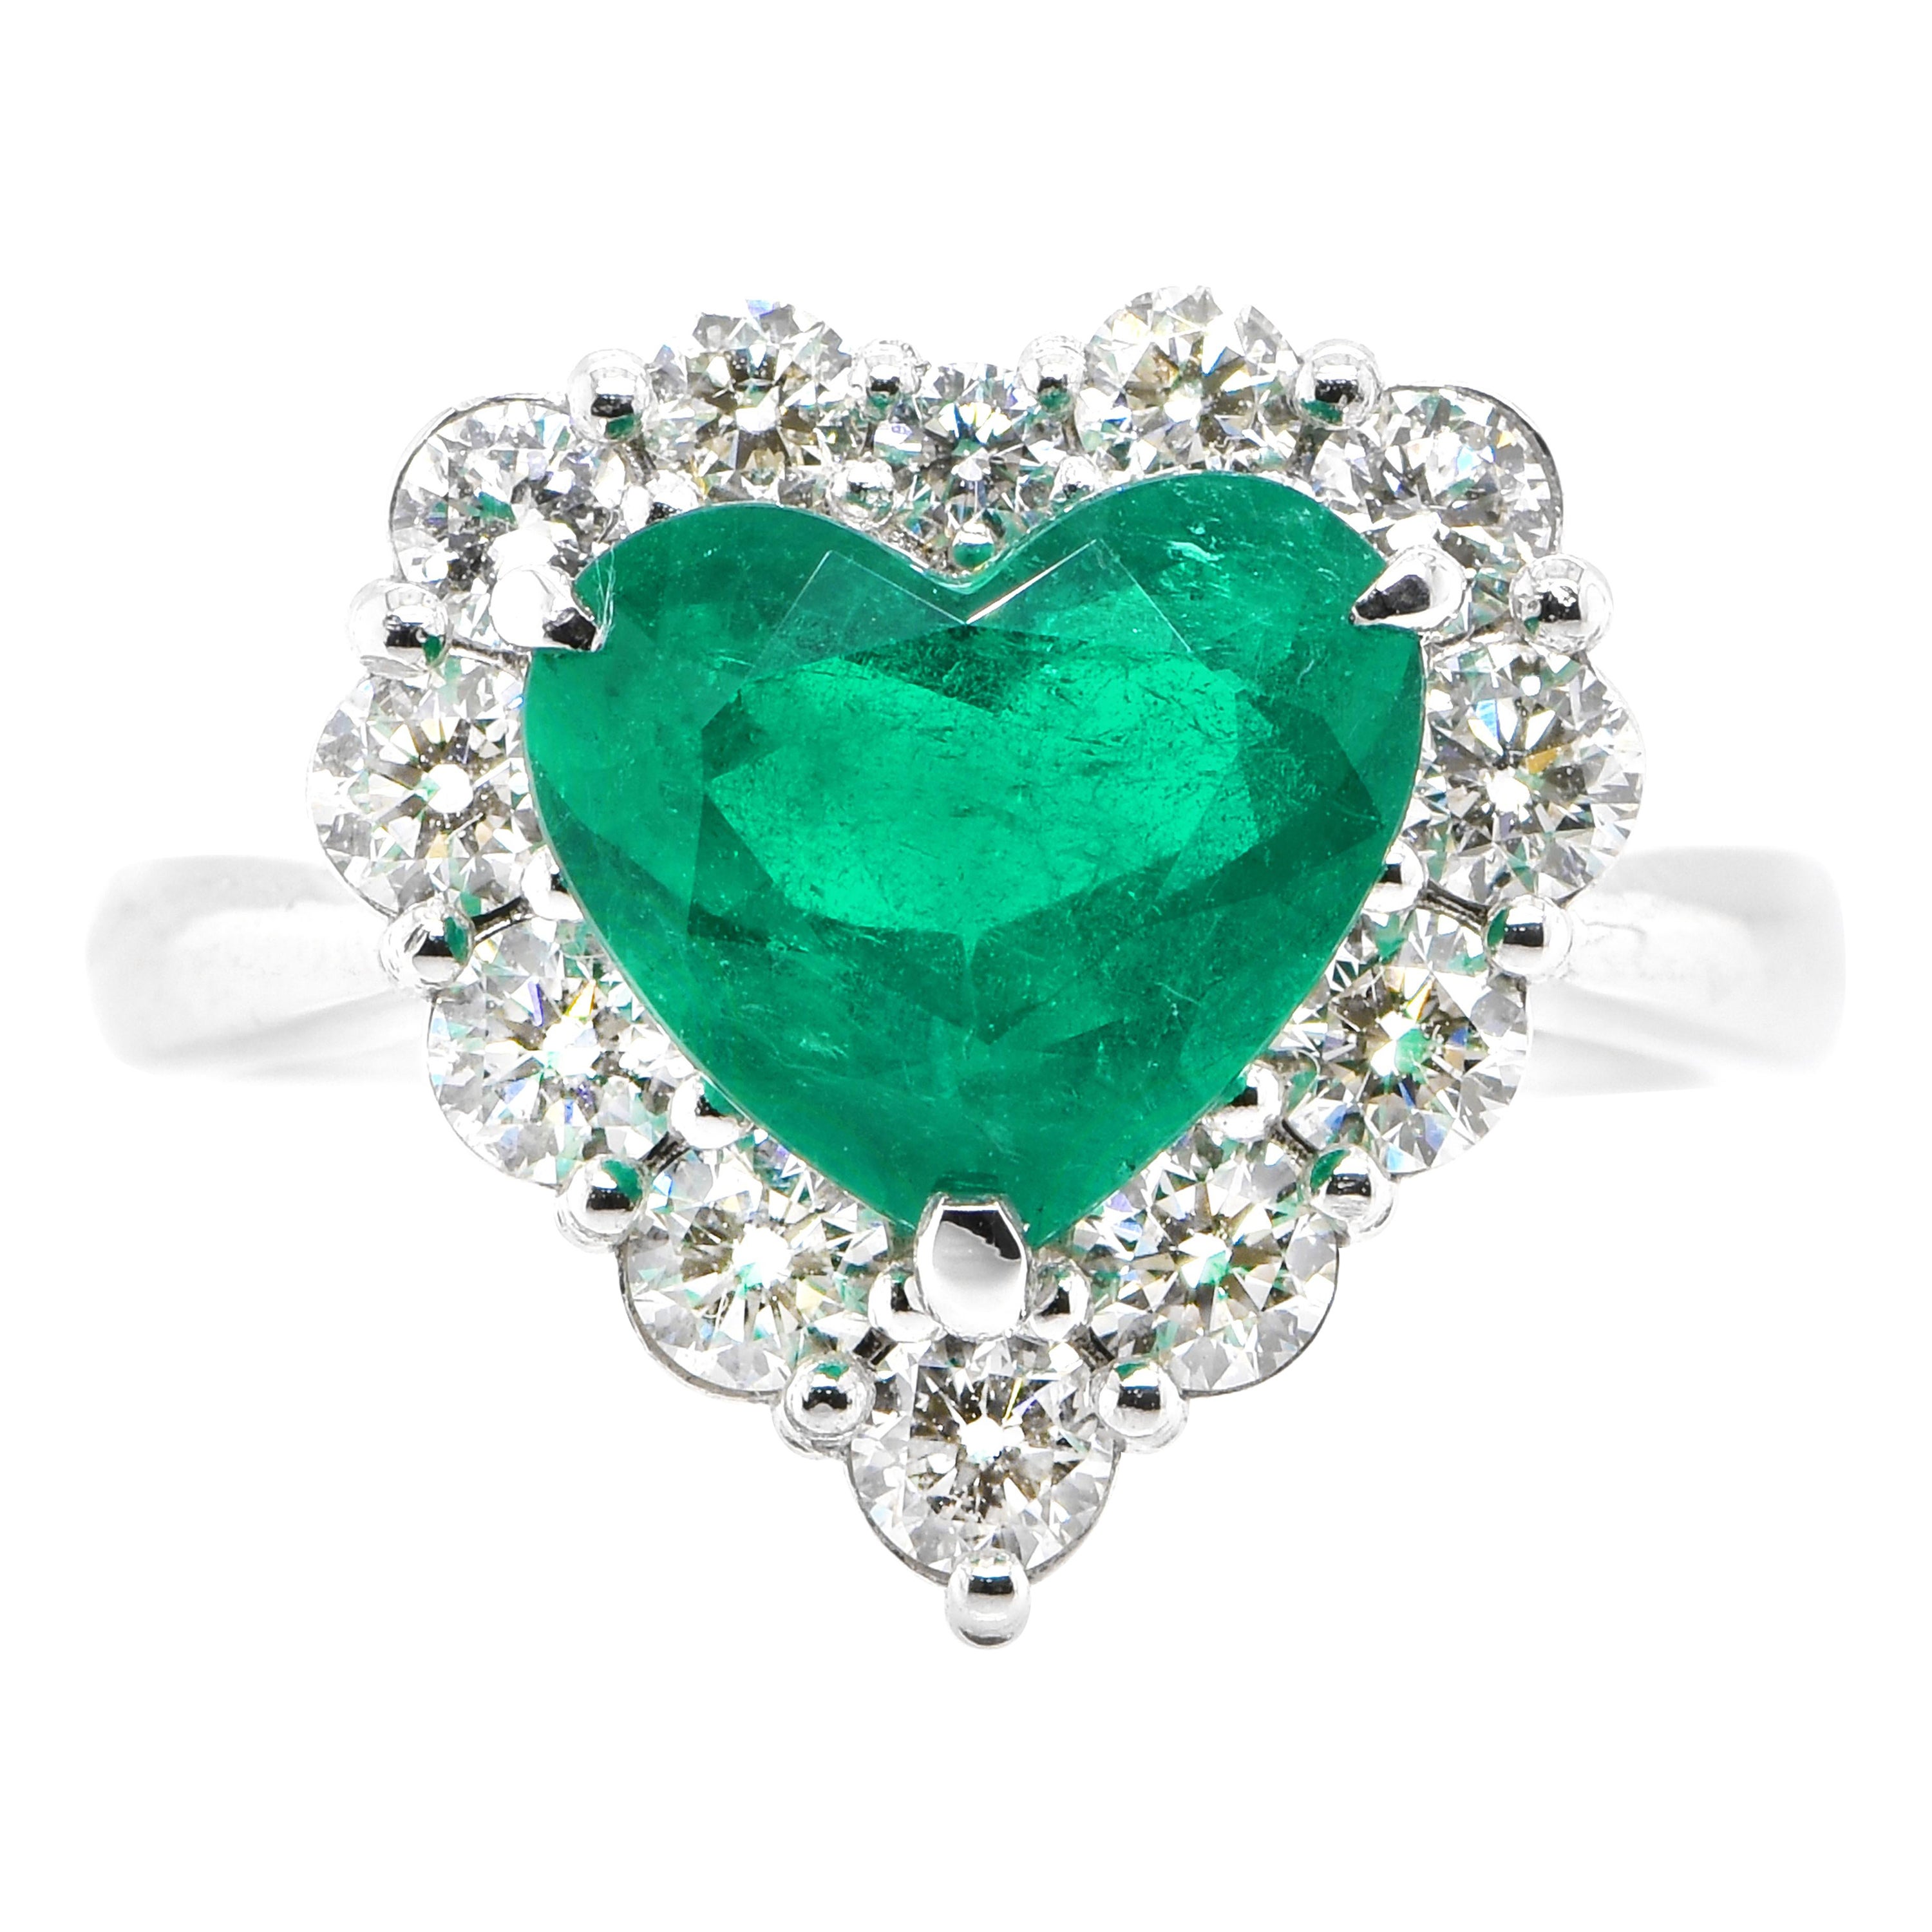 GIA Certified 2.25 Carat Heart Shape Colombian Emerald Ring Set in Platinum